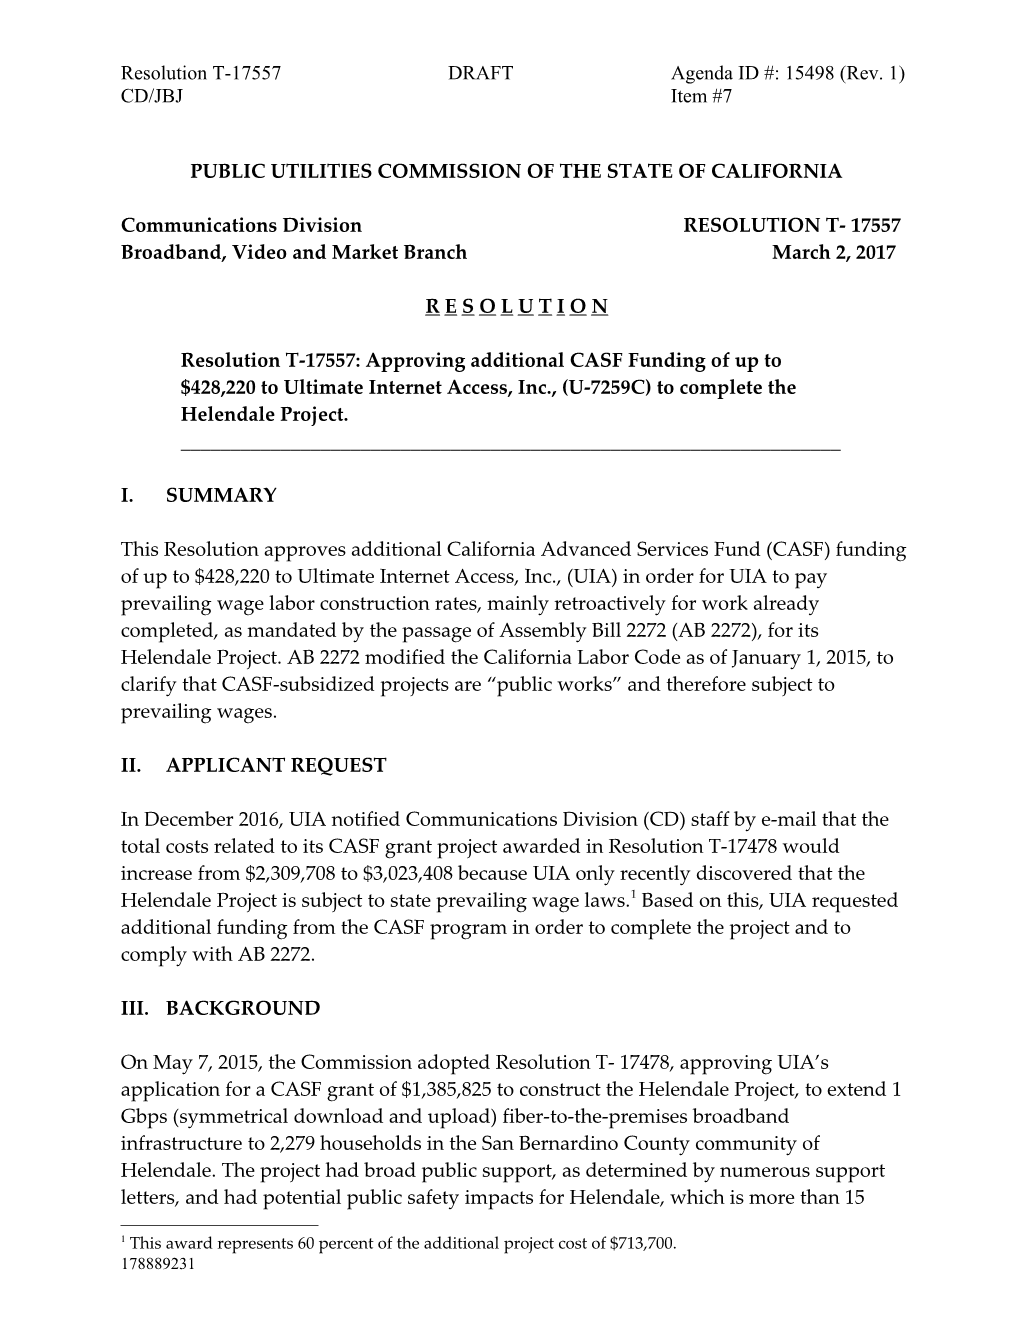 Public Utilities Commission of the State of California s61